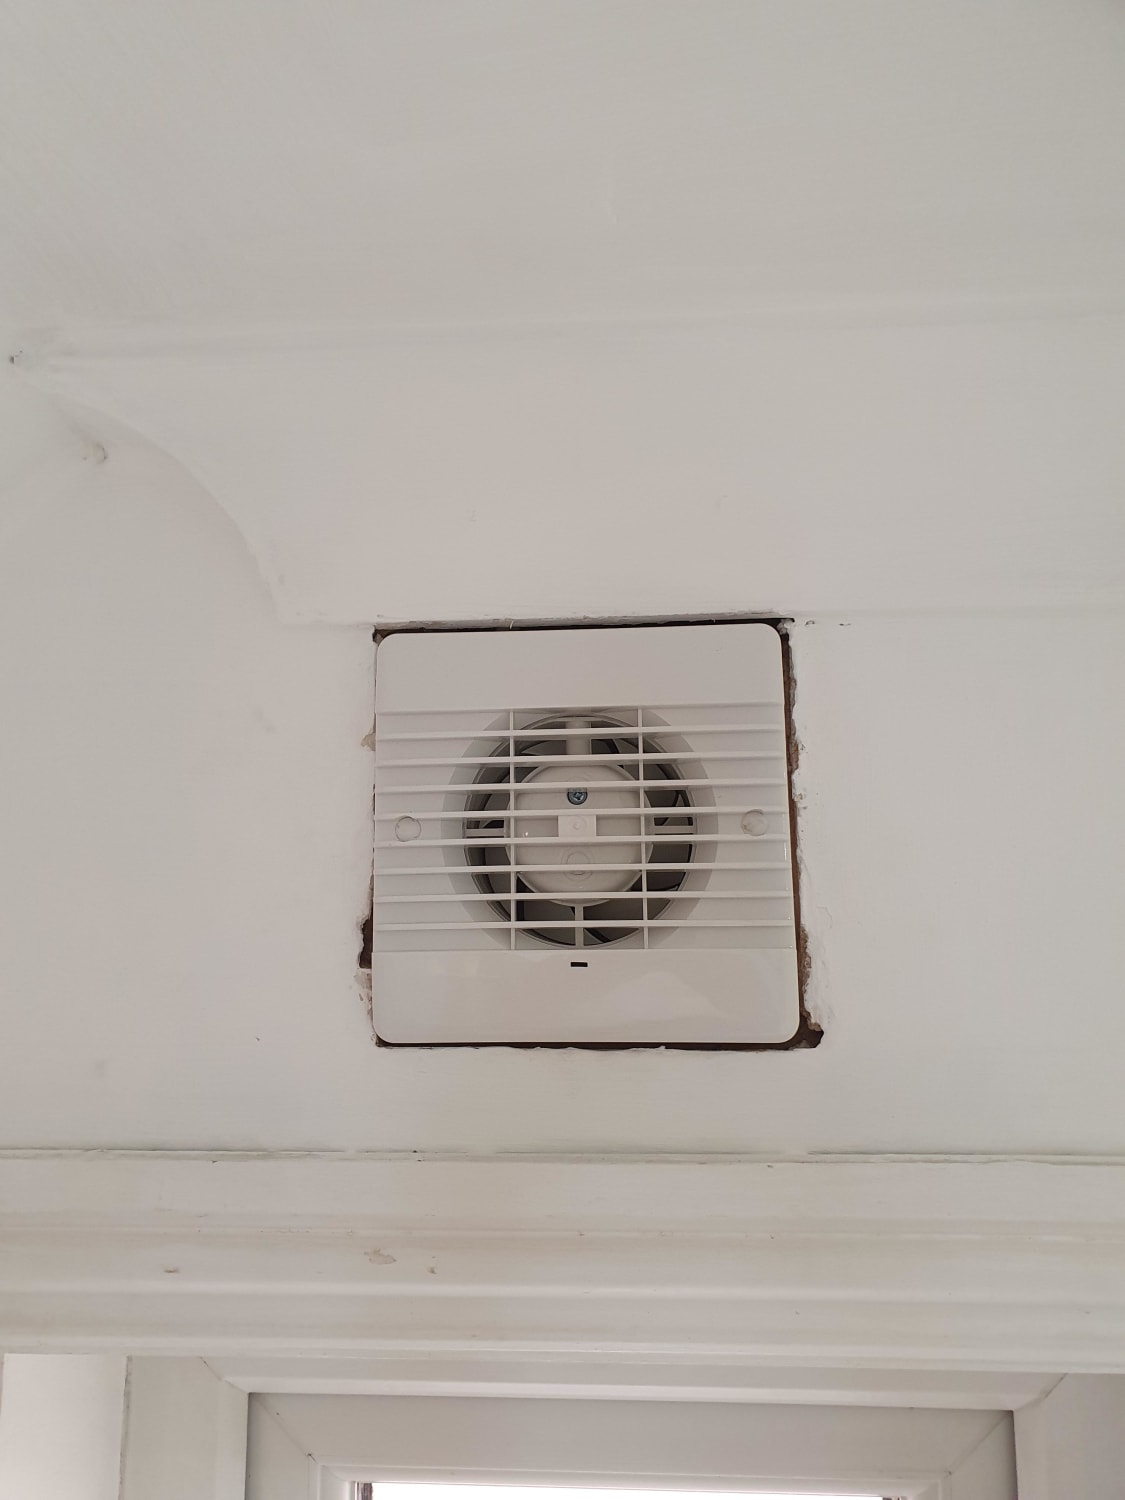 What's the best way to fill around this extractor fan?